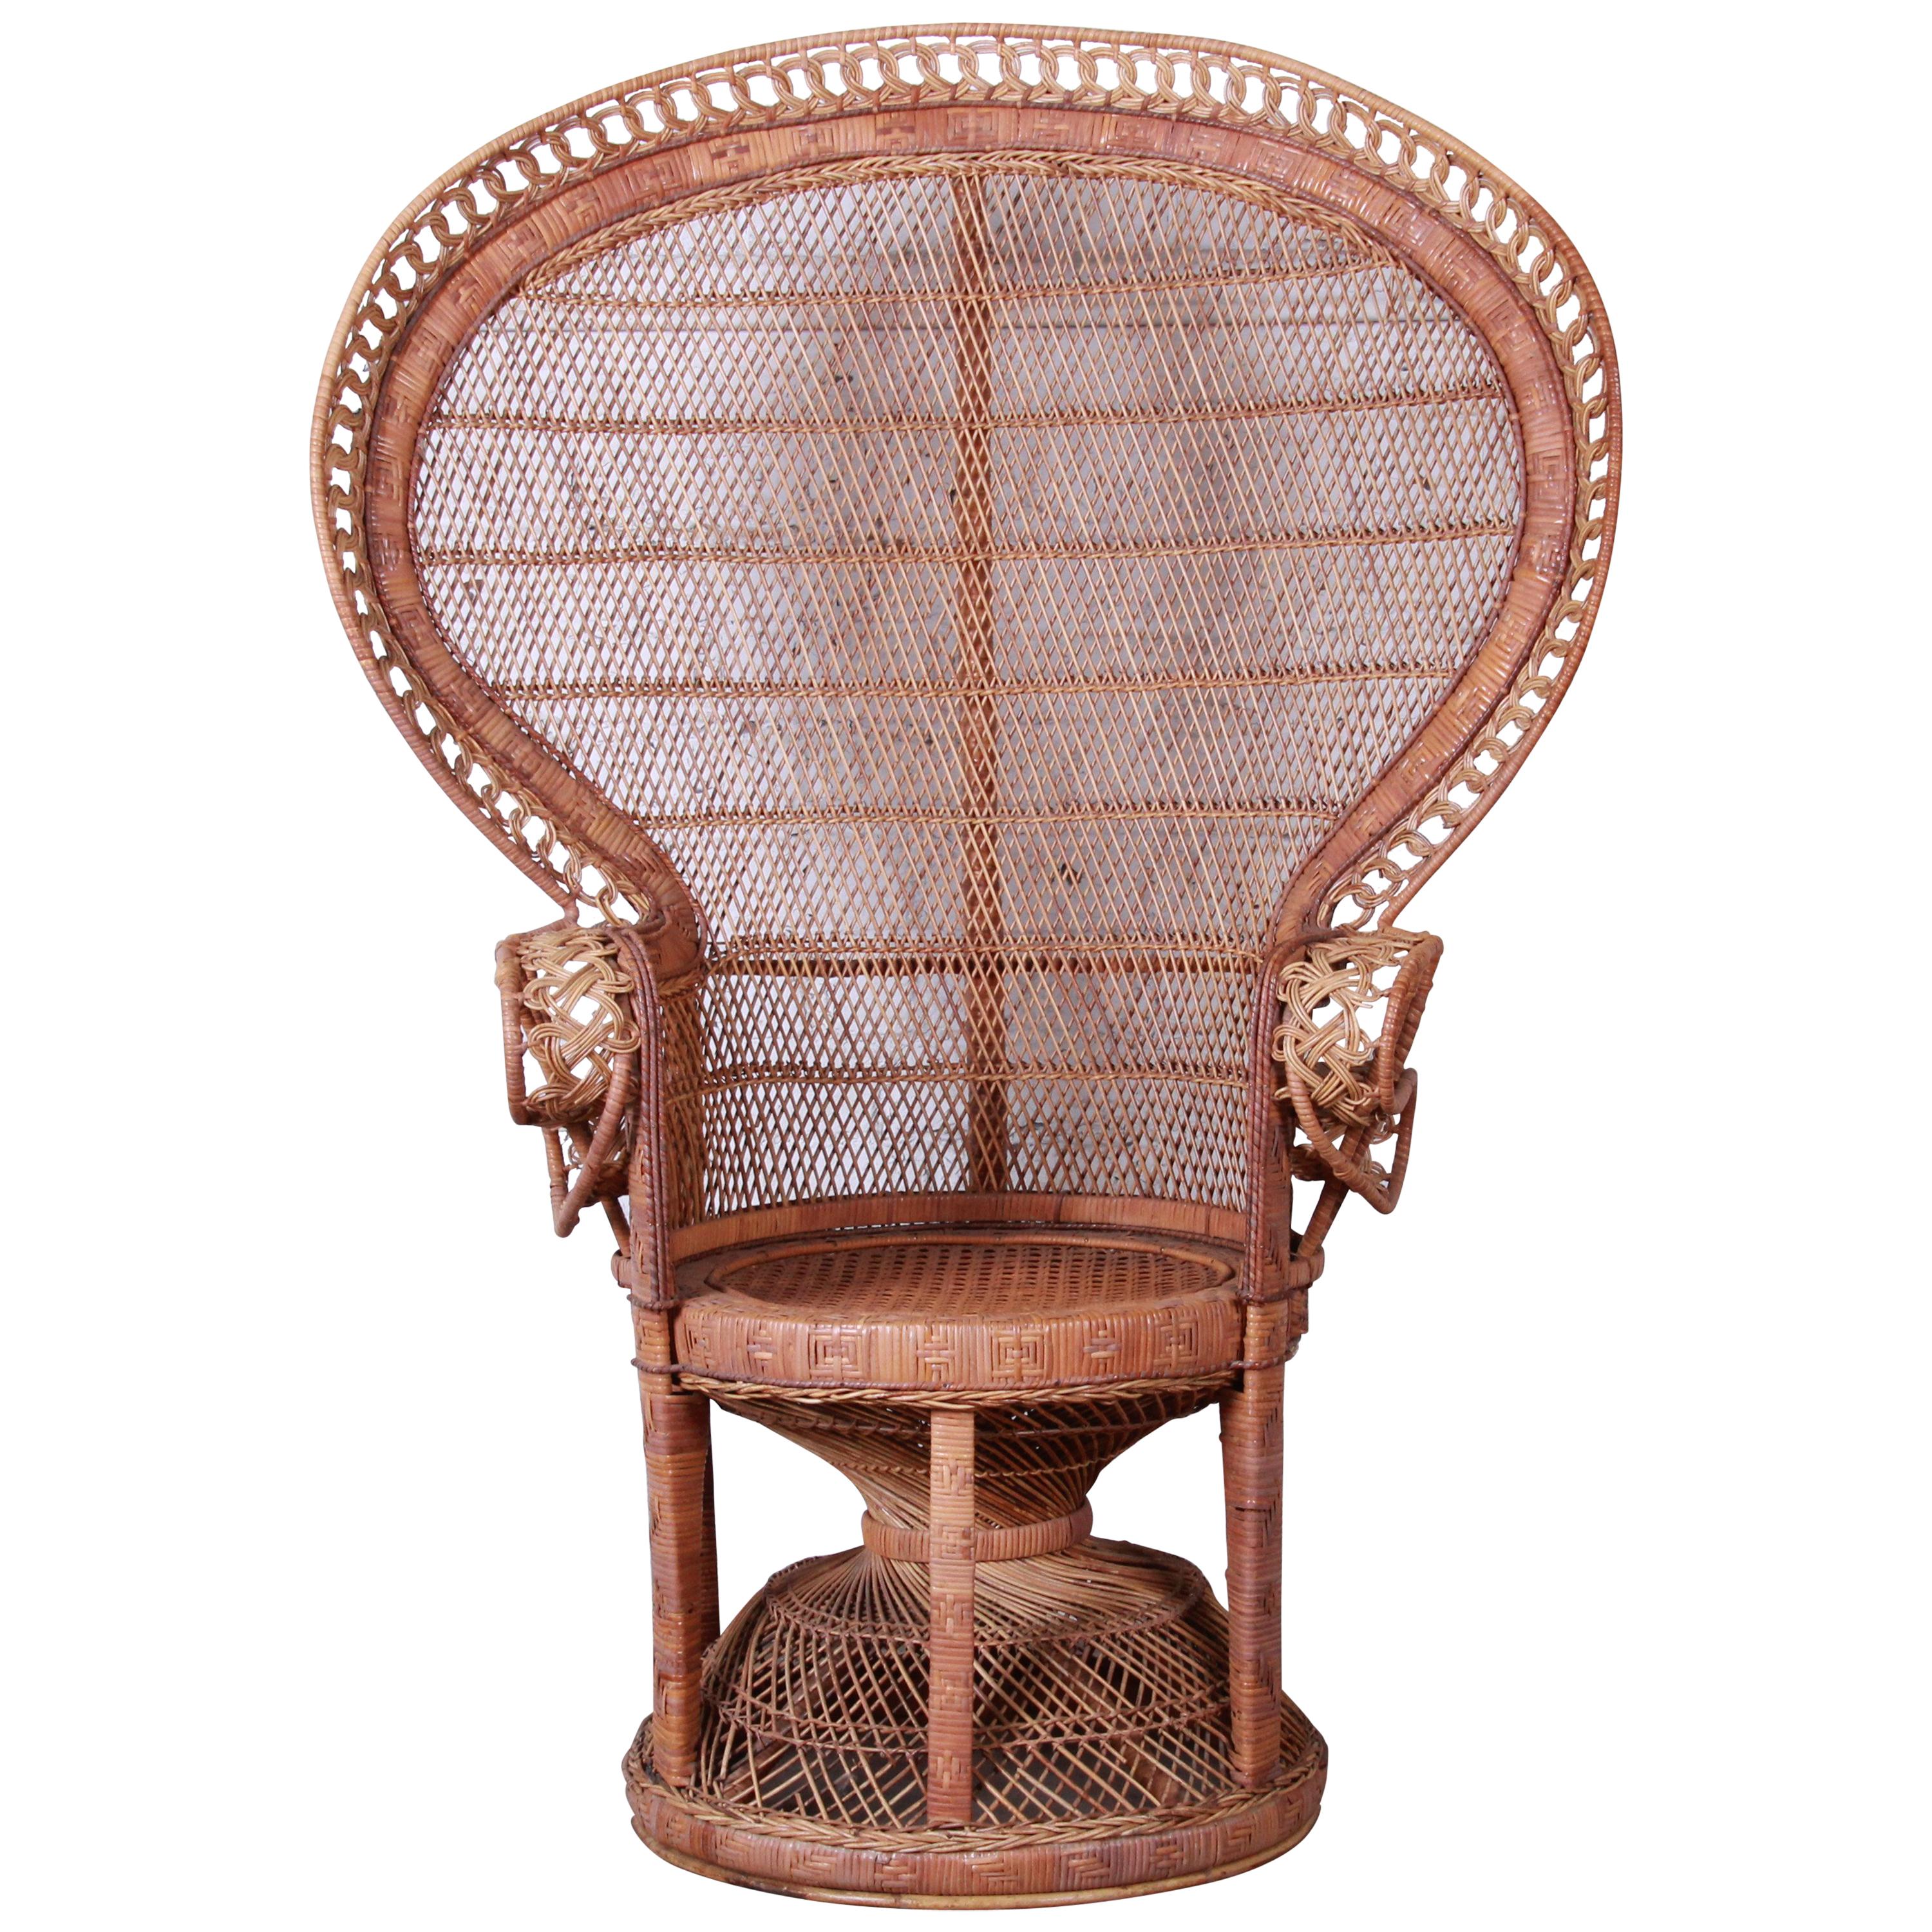 Iconic Bohemian Wicker Emanuelle Peacock Chair, 1970s